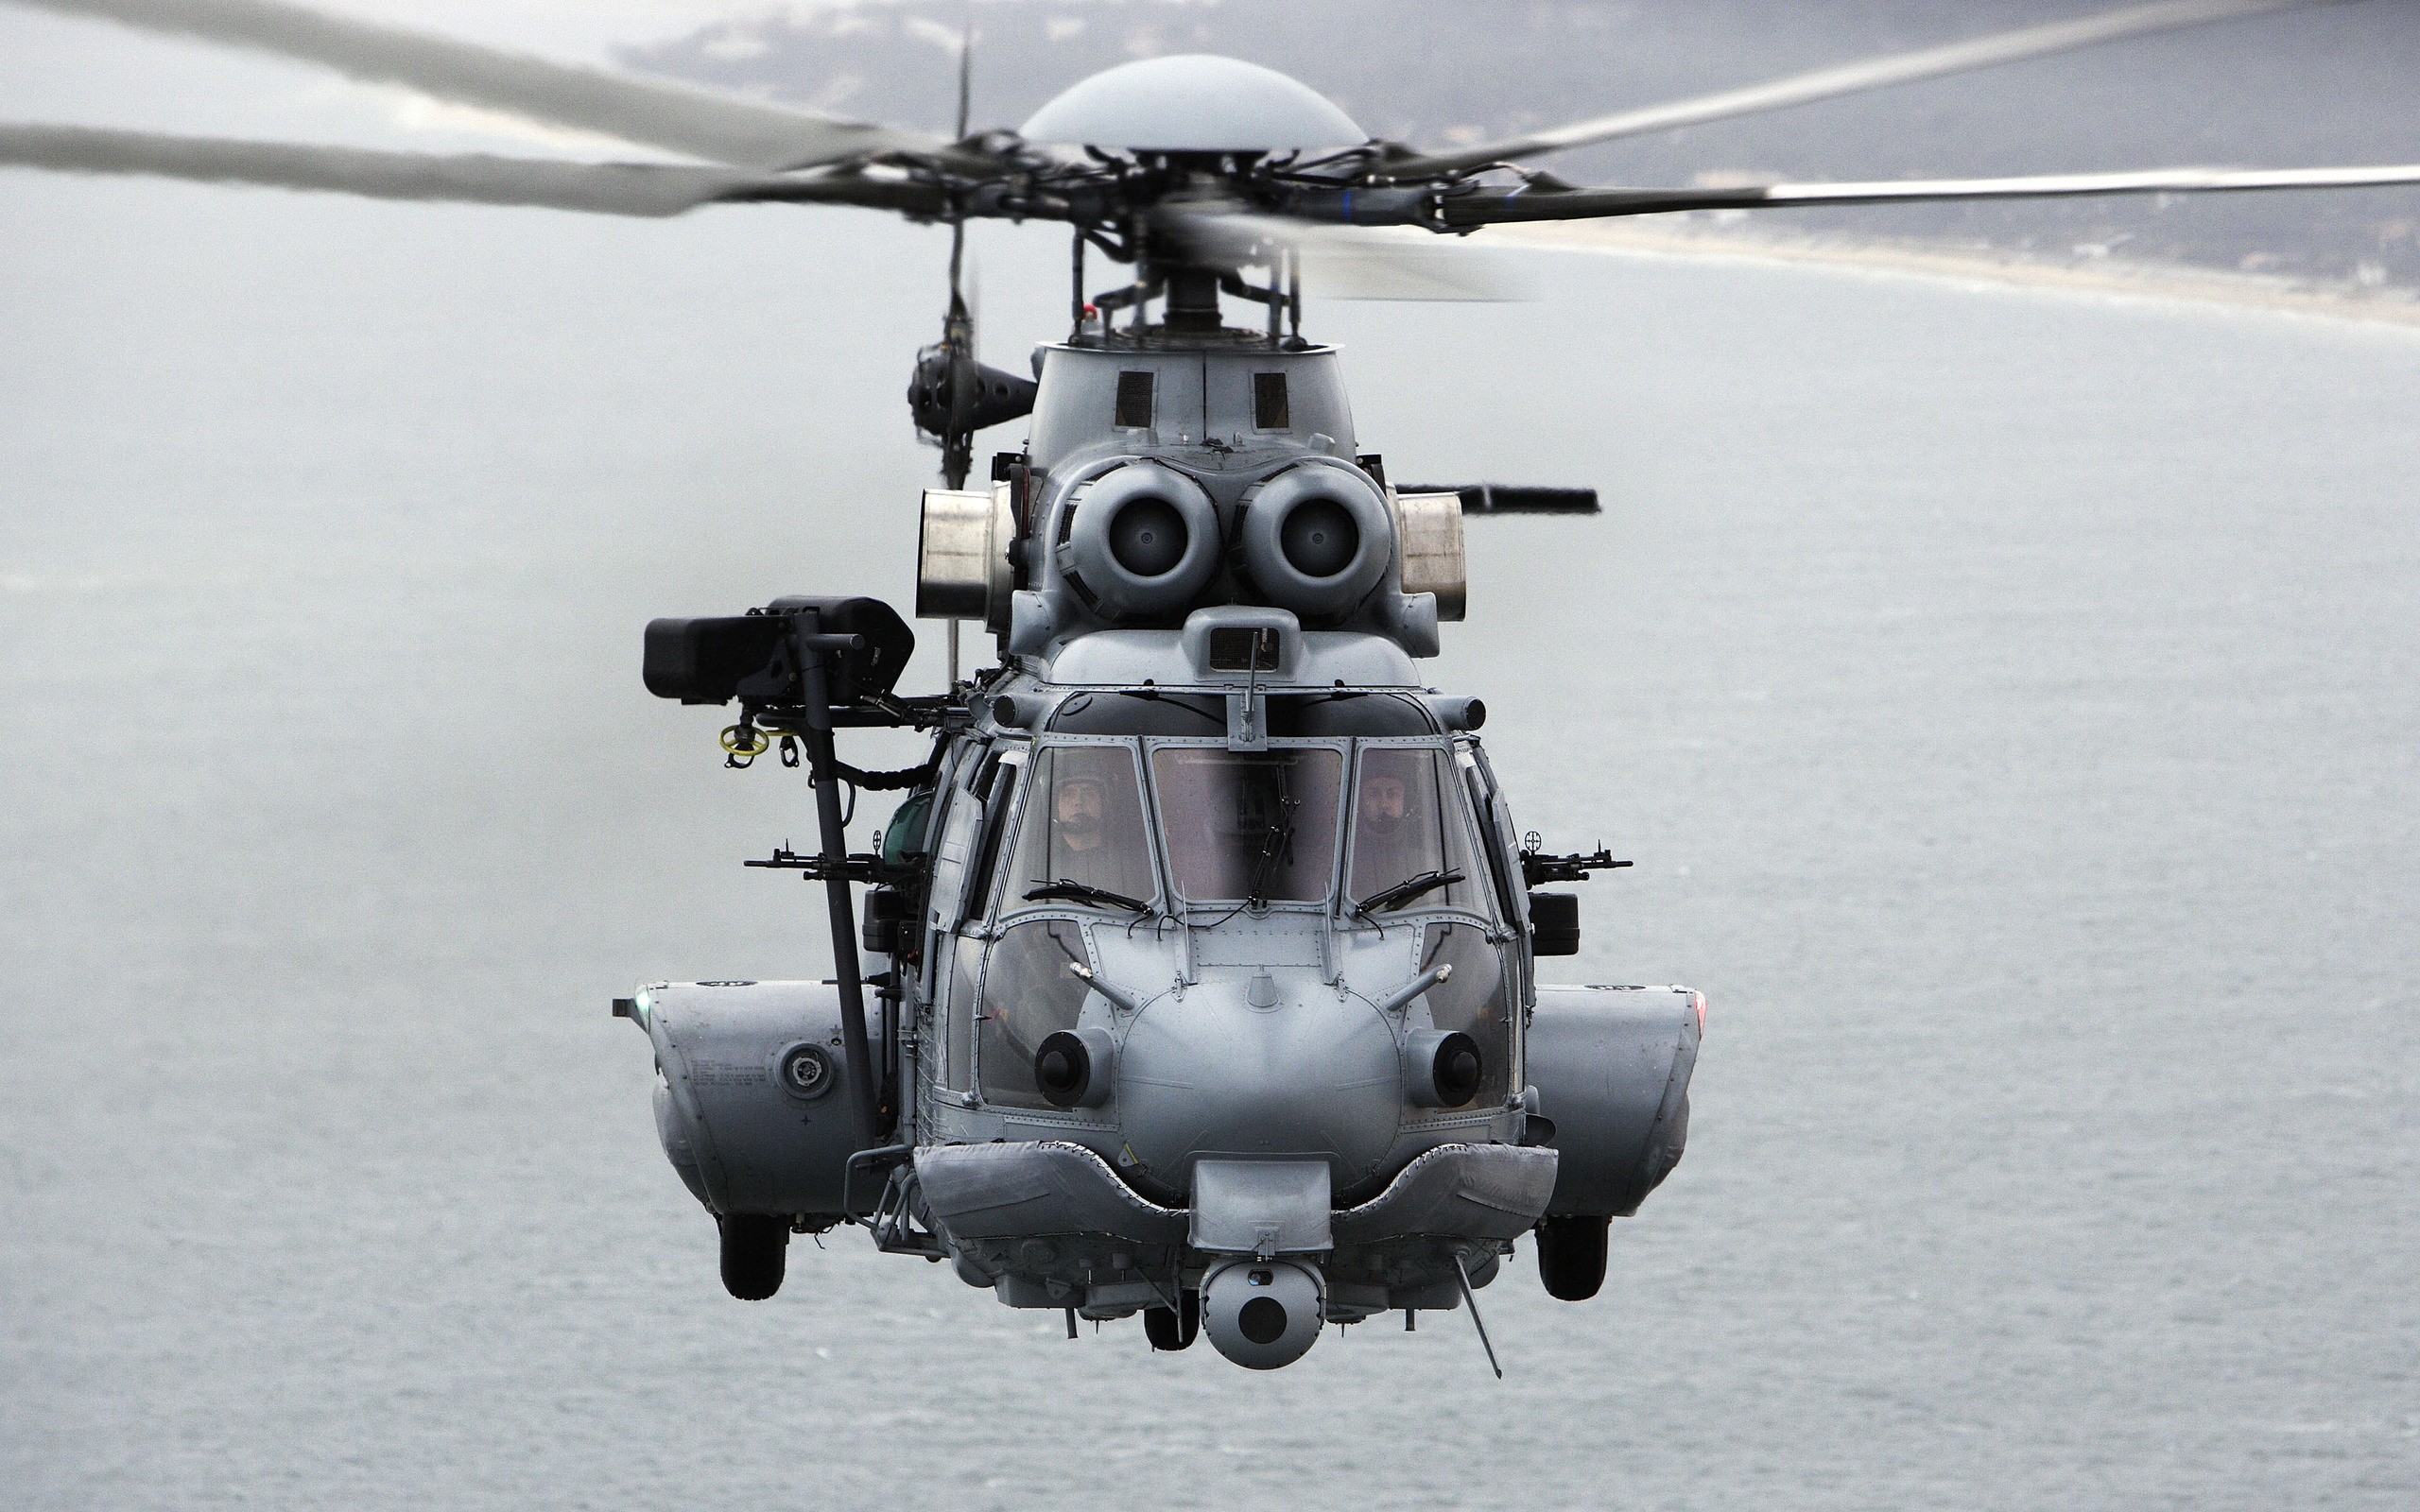 Eurocopter EC725 Cougar, Helicopters Wallpaper